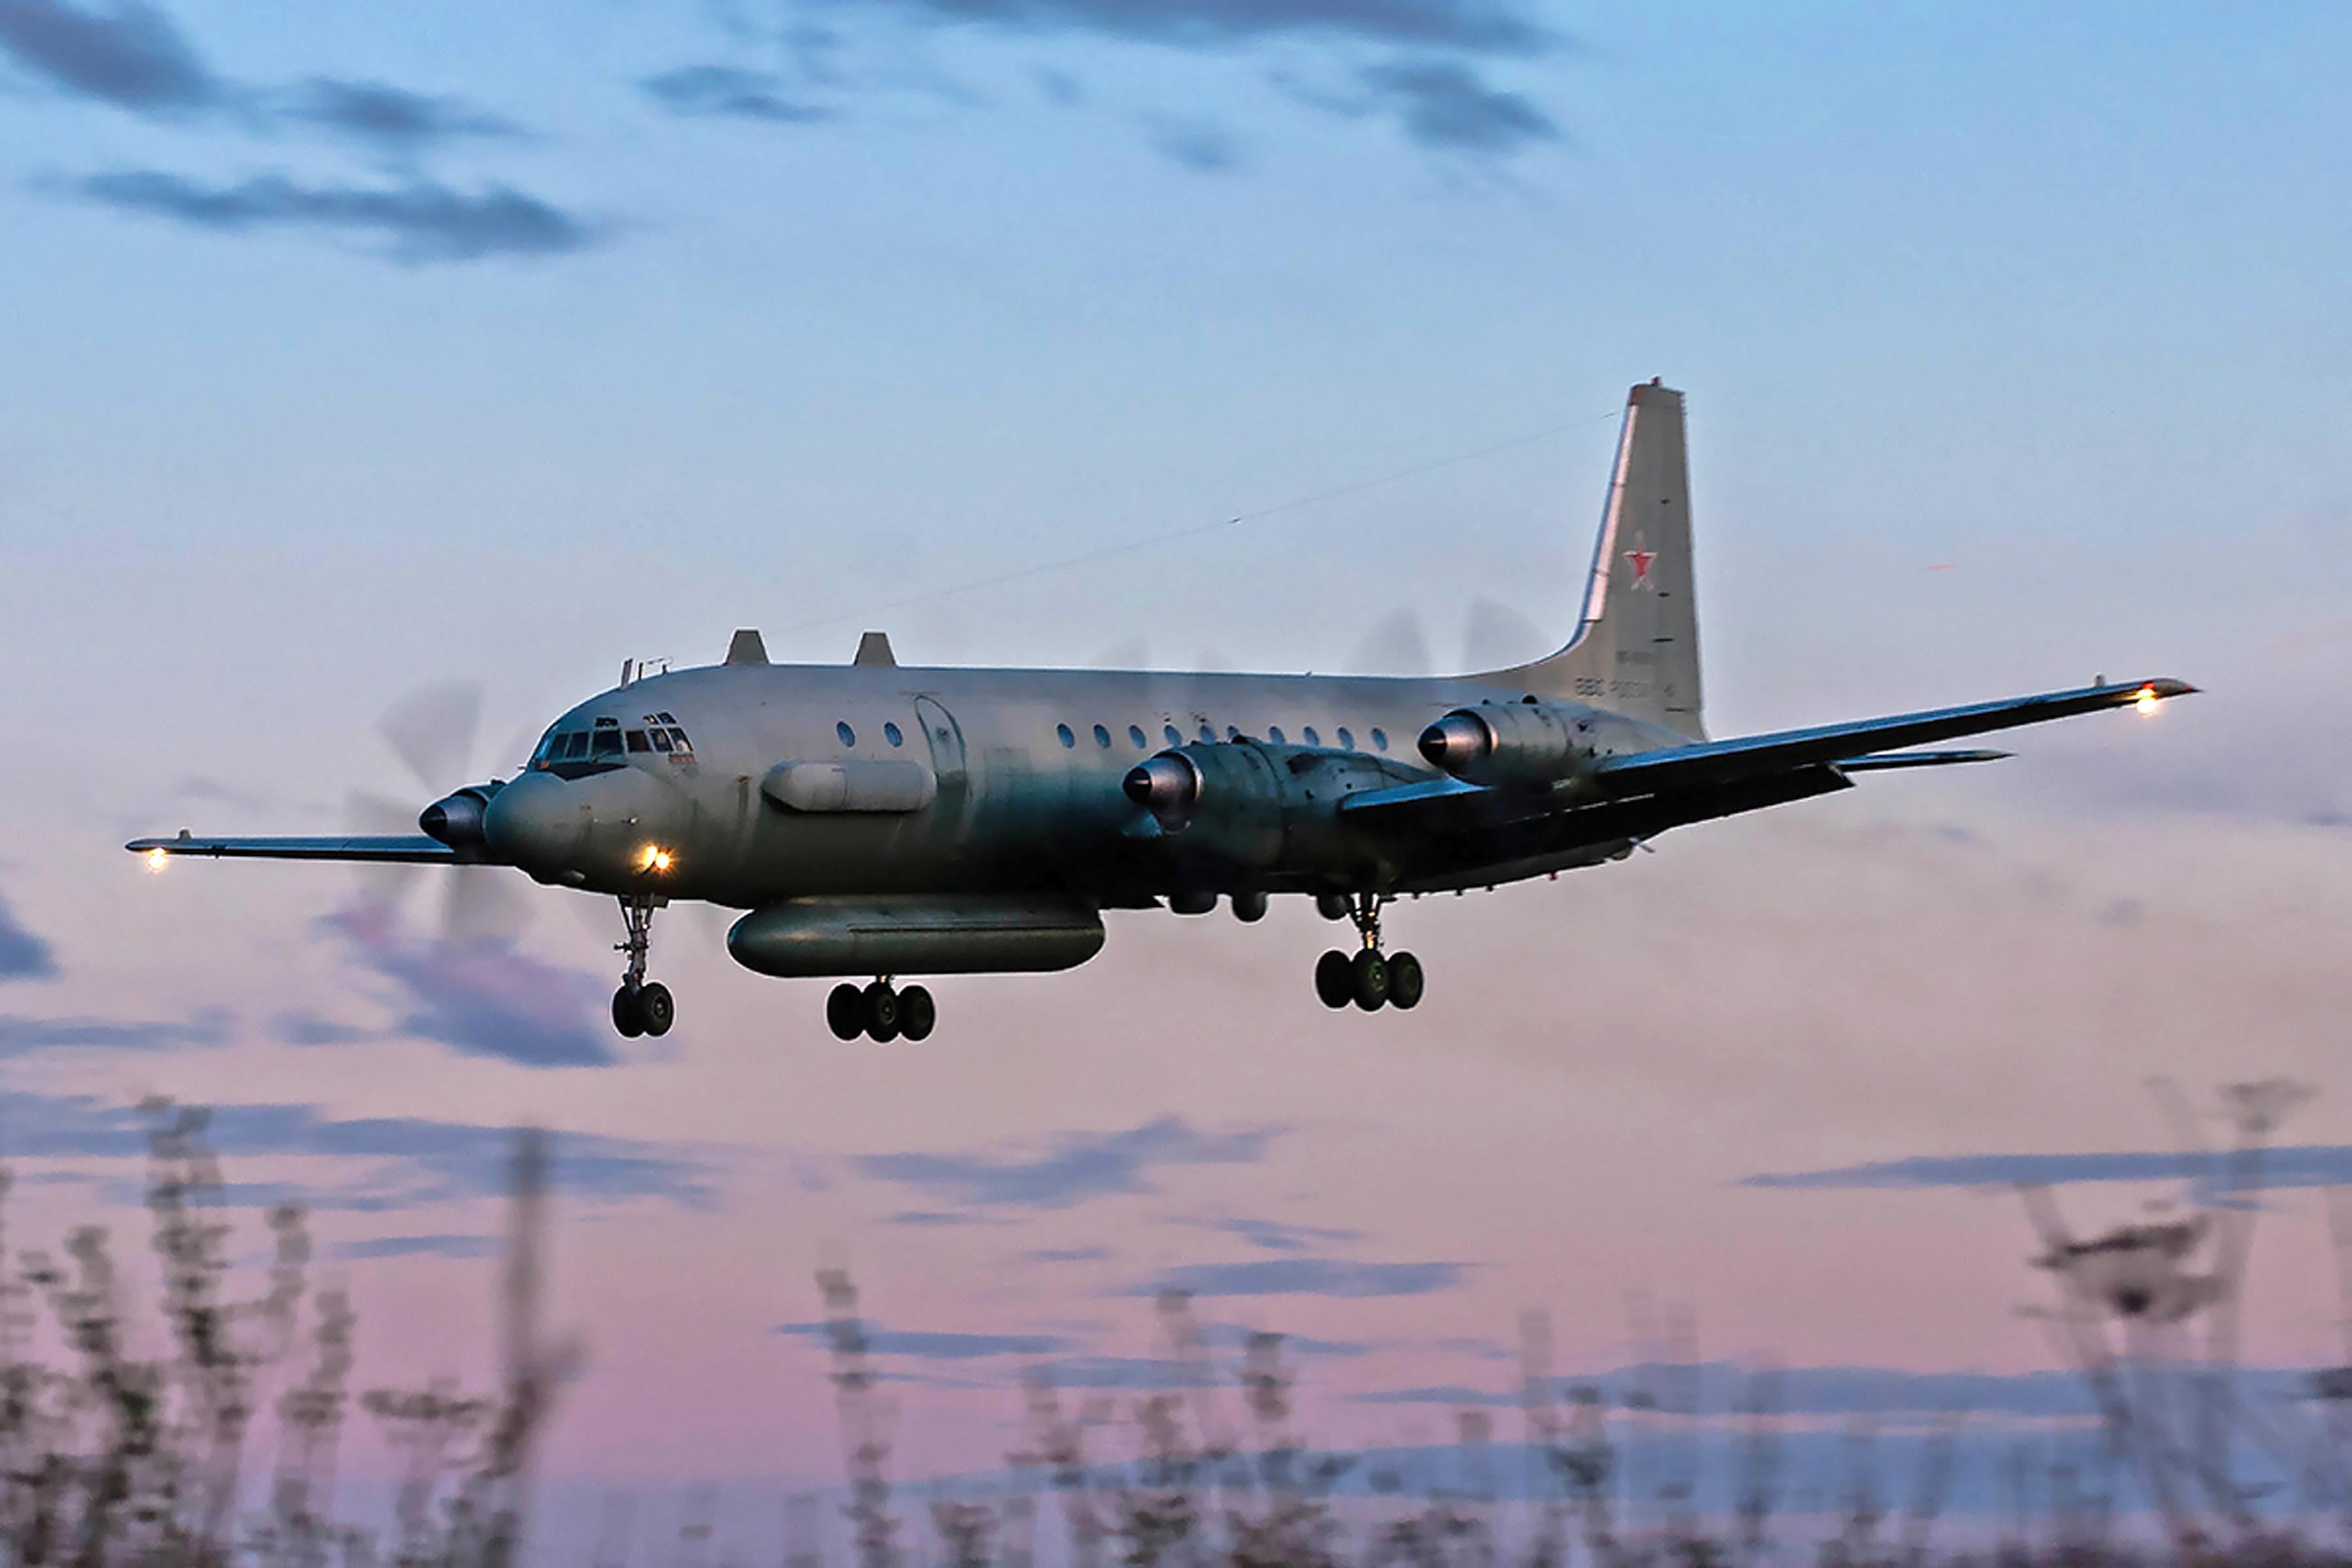 A photo taken on July 23, 2006 shows an Russian IL-20M plane landing at an unknown location.